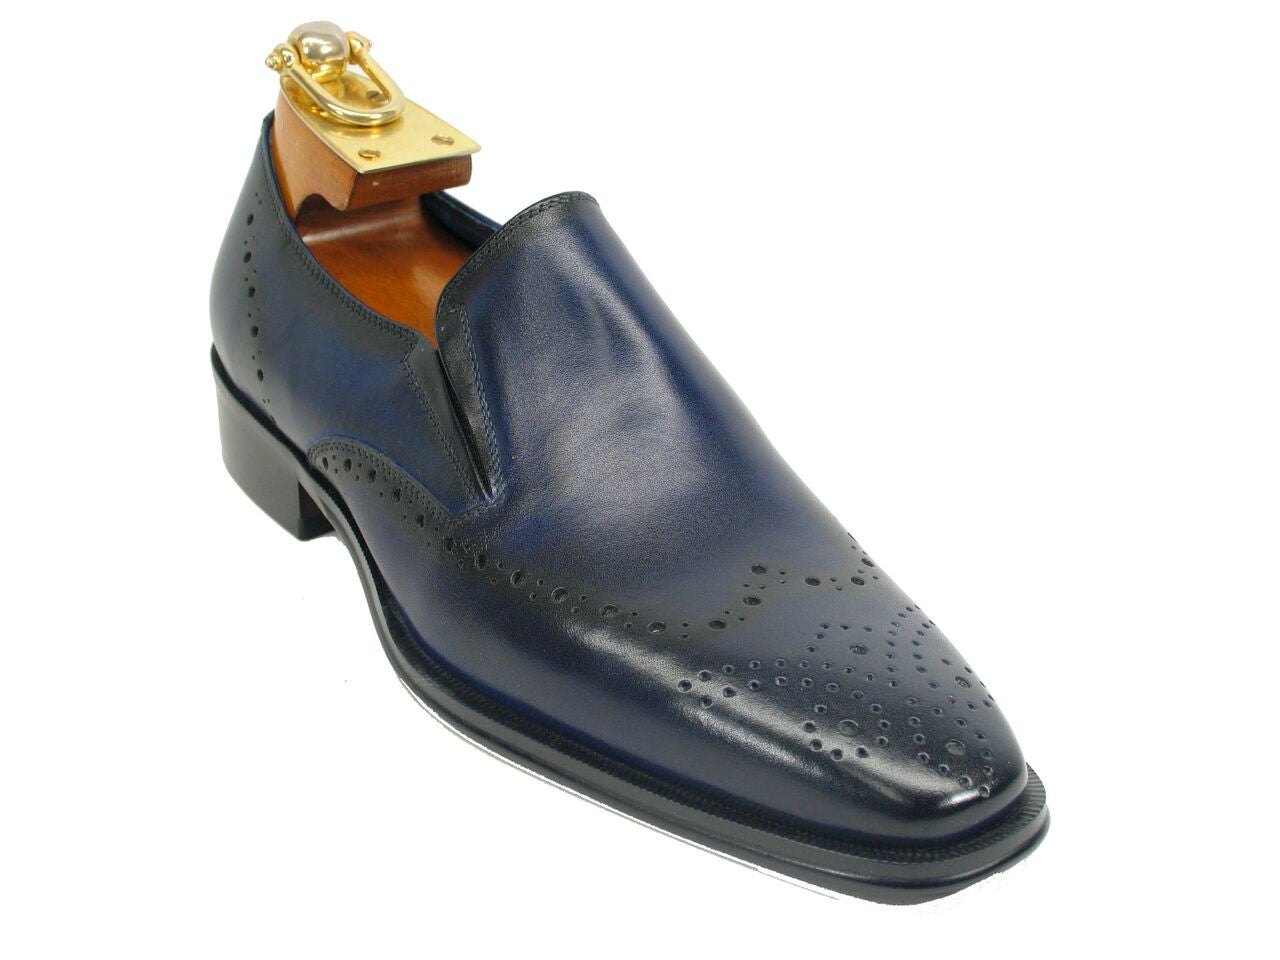 Two Tone Leather Loafer